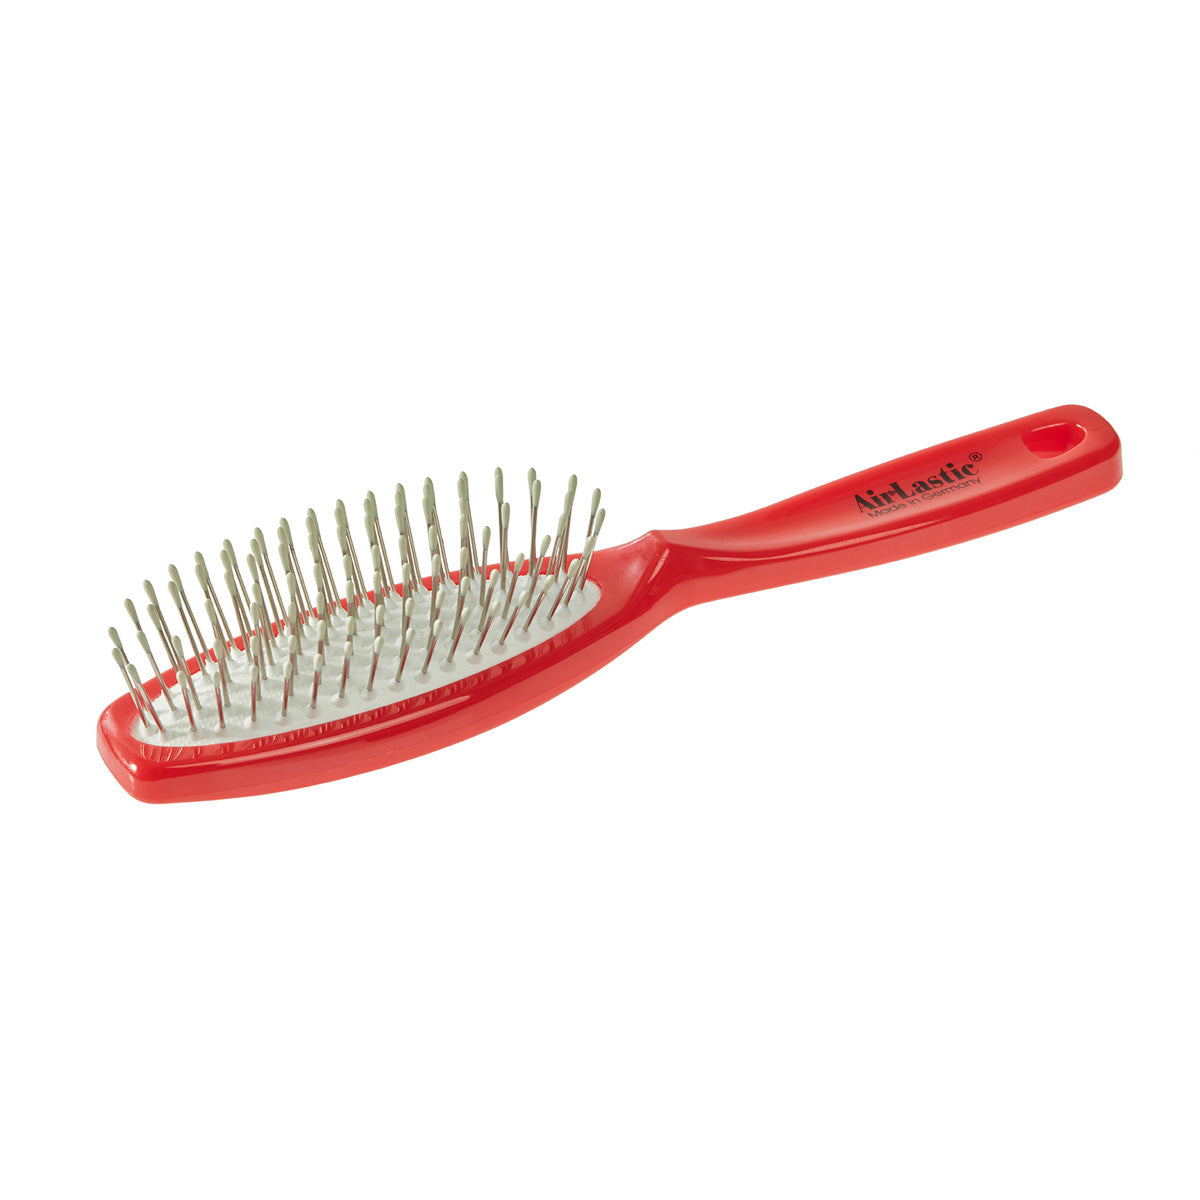 Oval steel -spike pillow brush airline (18cm)